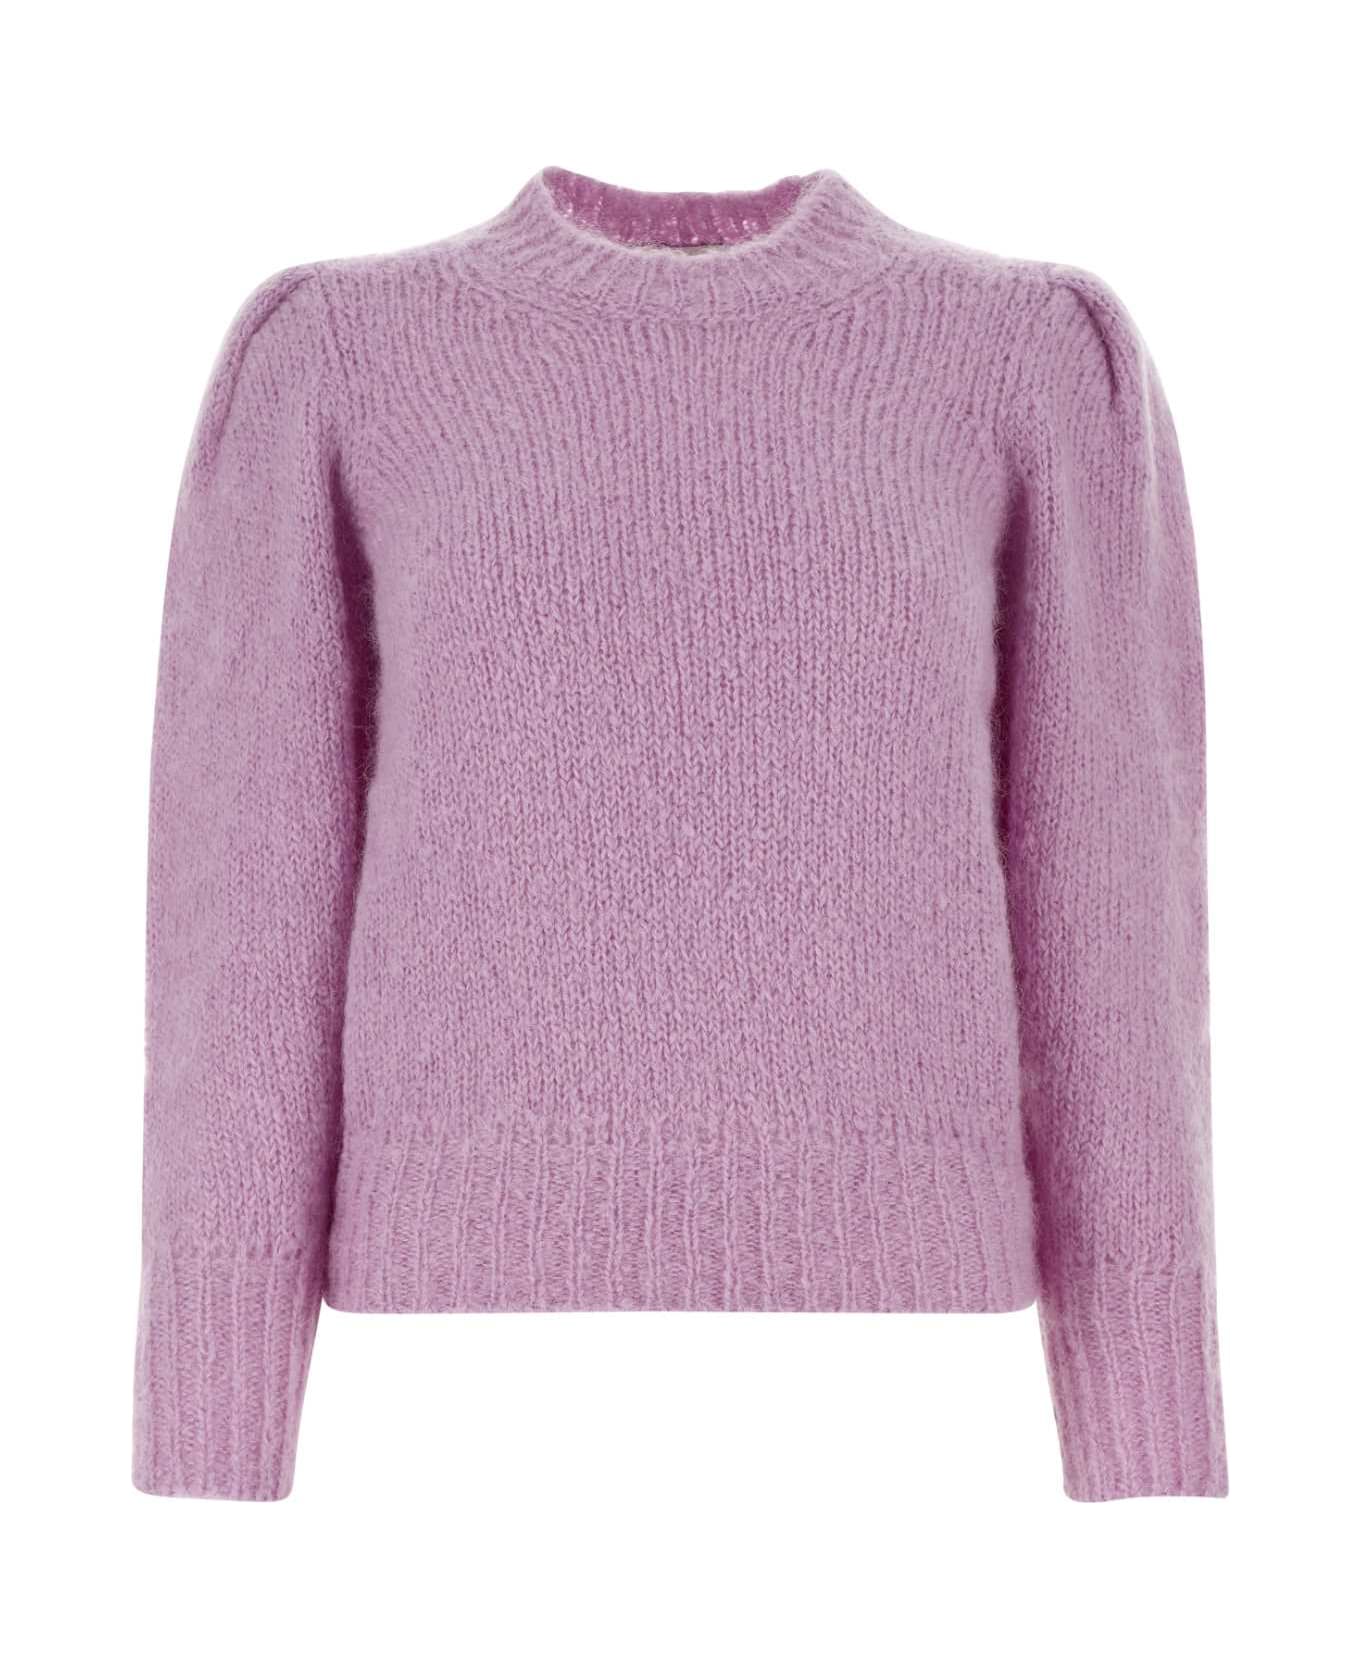 Isabel Marant Lilac Mohair Blend Emma Sweater - LILAC